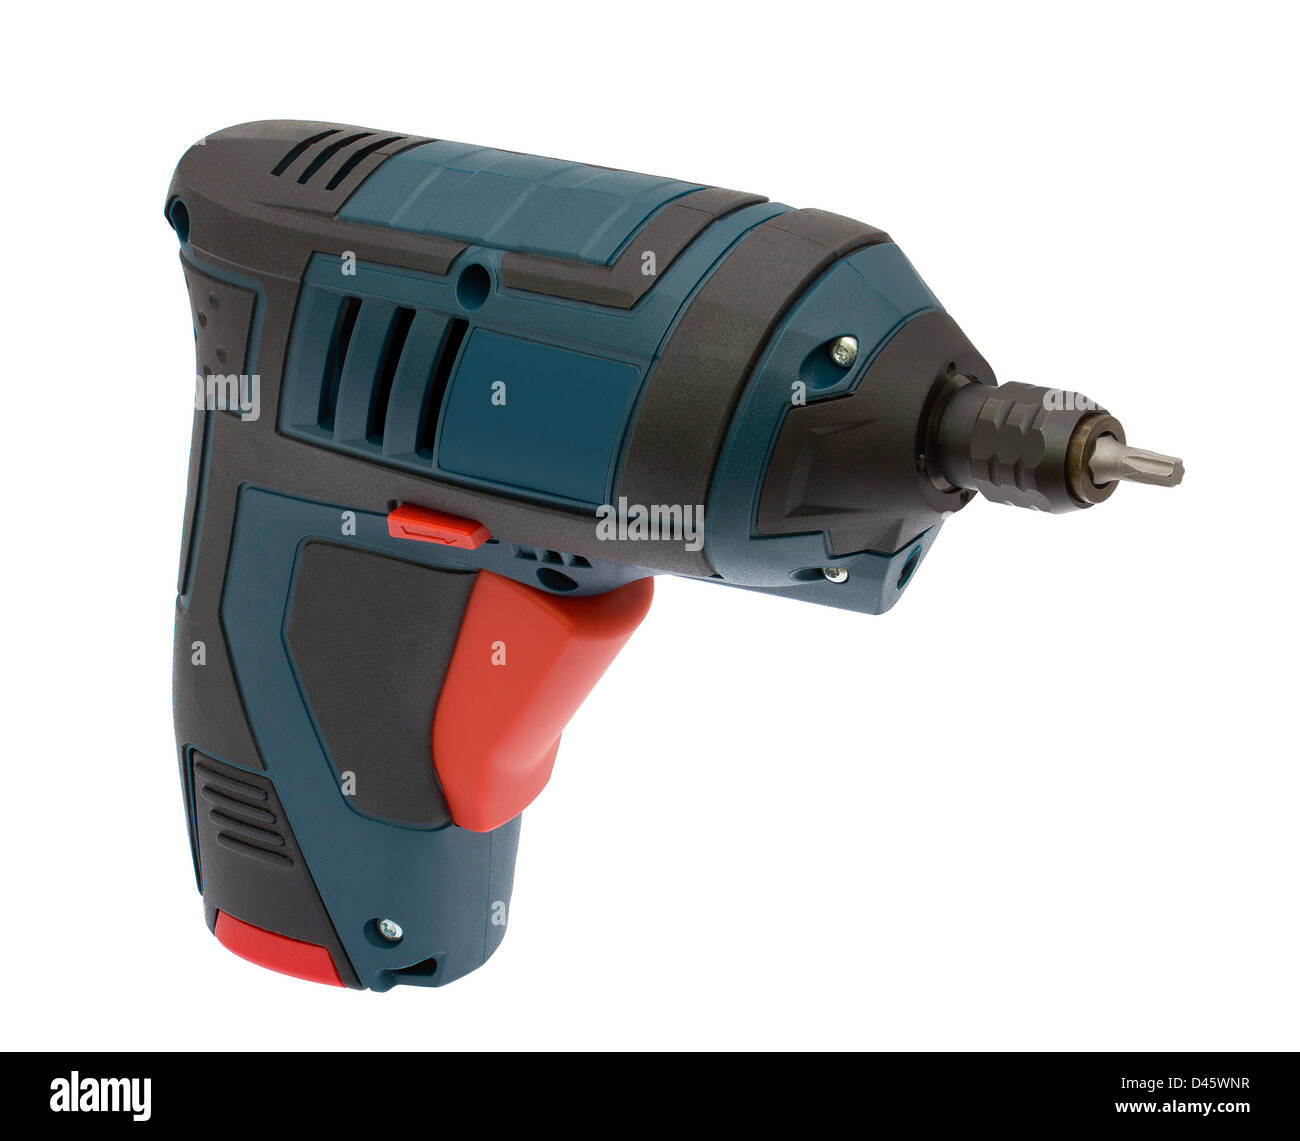 https://c8.alamy.com/comp/D45WNR/a-cordless-power-drill-isolated-on-a-white-background-D45WNR.jpg